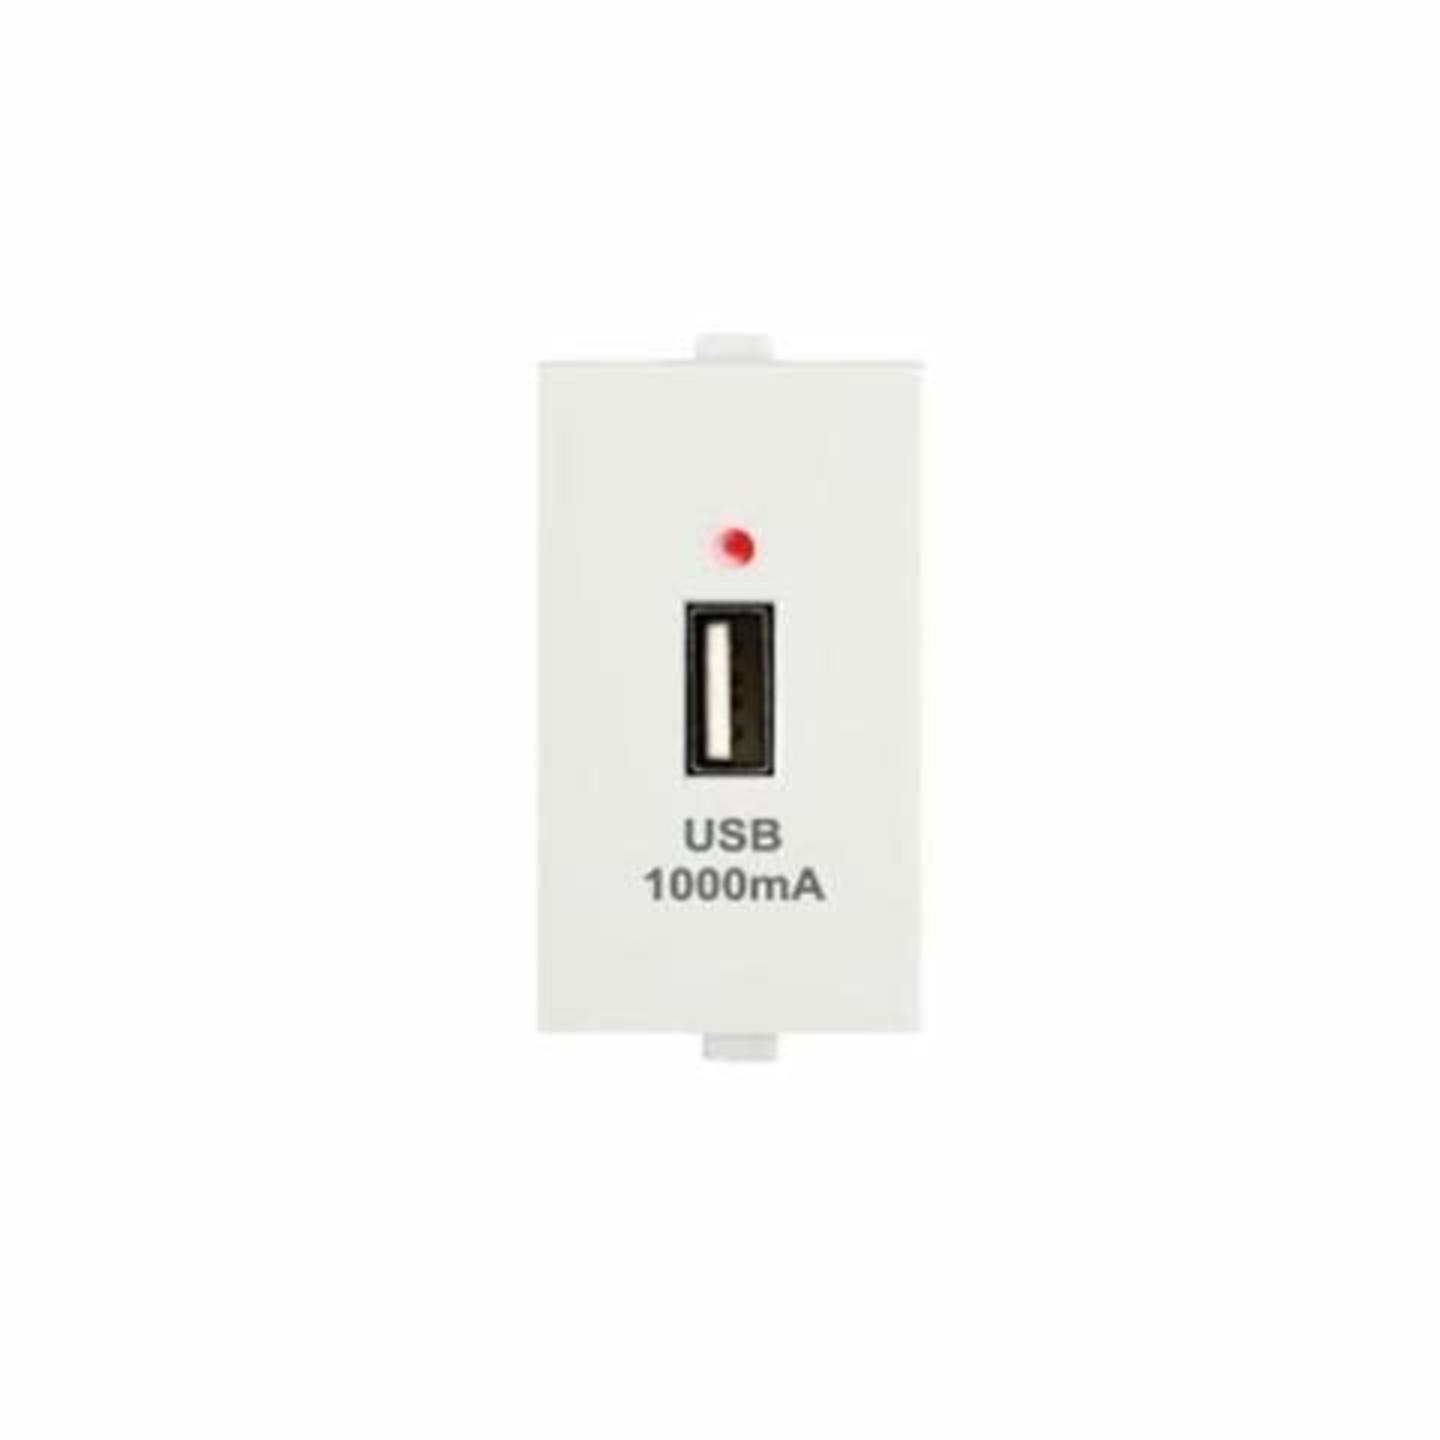 Anchor by Panasonic Penta Modular Polycarbonate 1m USB Charger 1000 mA 5V Dc White pack of 10